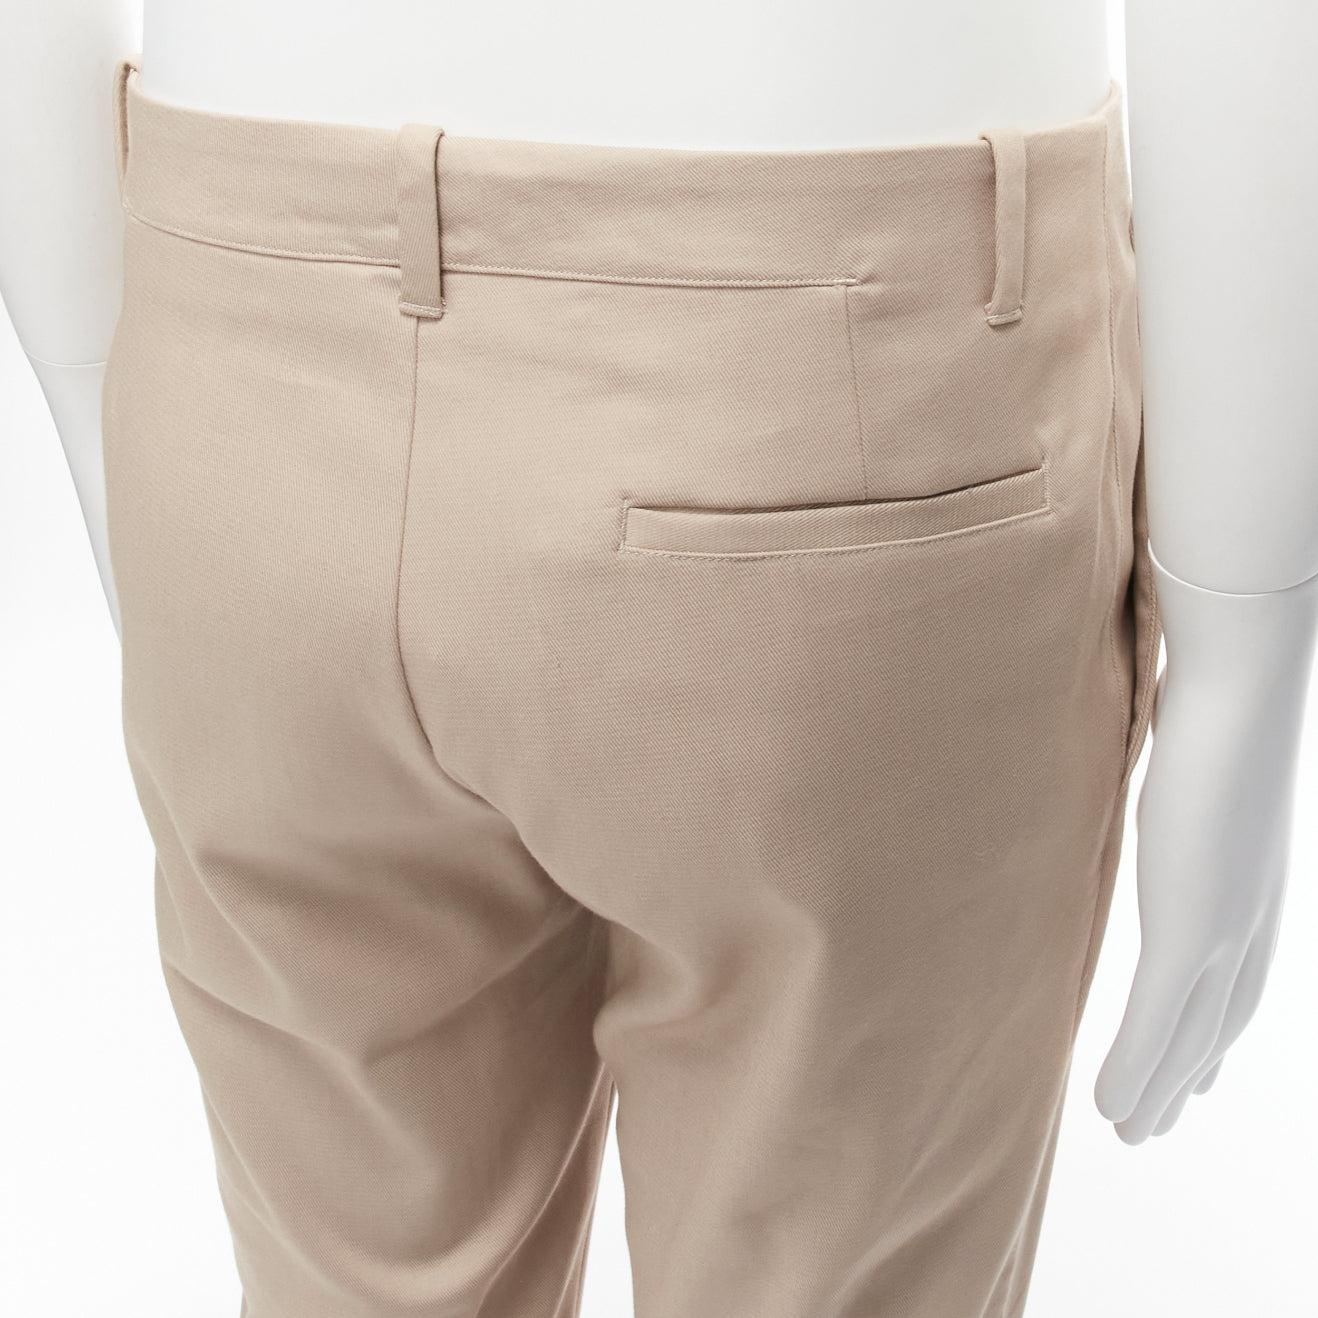 new LA PERLA MENS beige back darts minimal classic tapered trouser pants M
Reference: CNLE/A00208
Brand: La Perla
Material: Cotton, Blend
Color: Beige
Pattern: Solid
Closure: Zip Fly
Extra Details: Back darts at the back flatters the hips.
Made in: